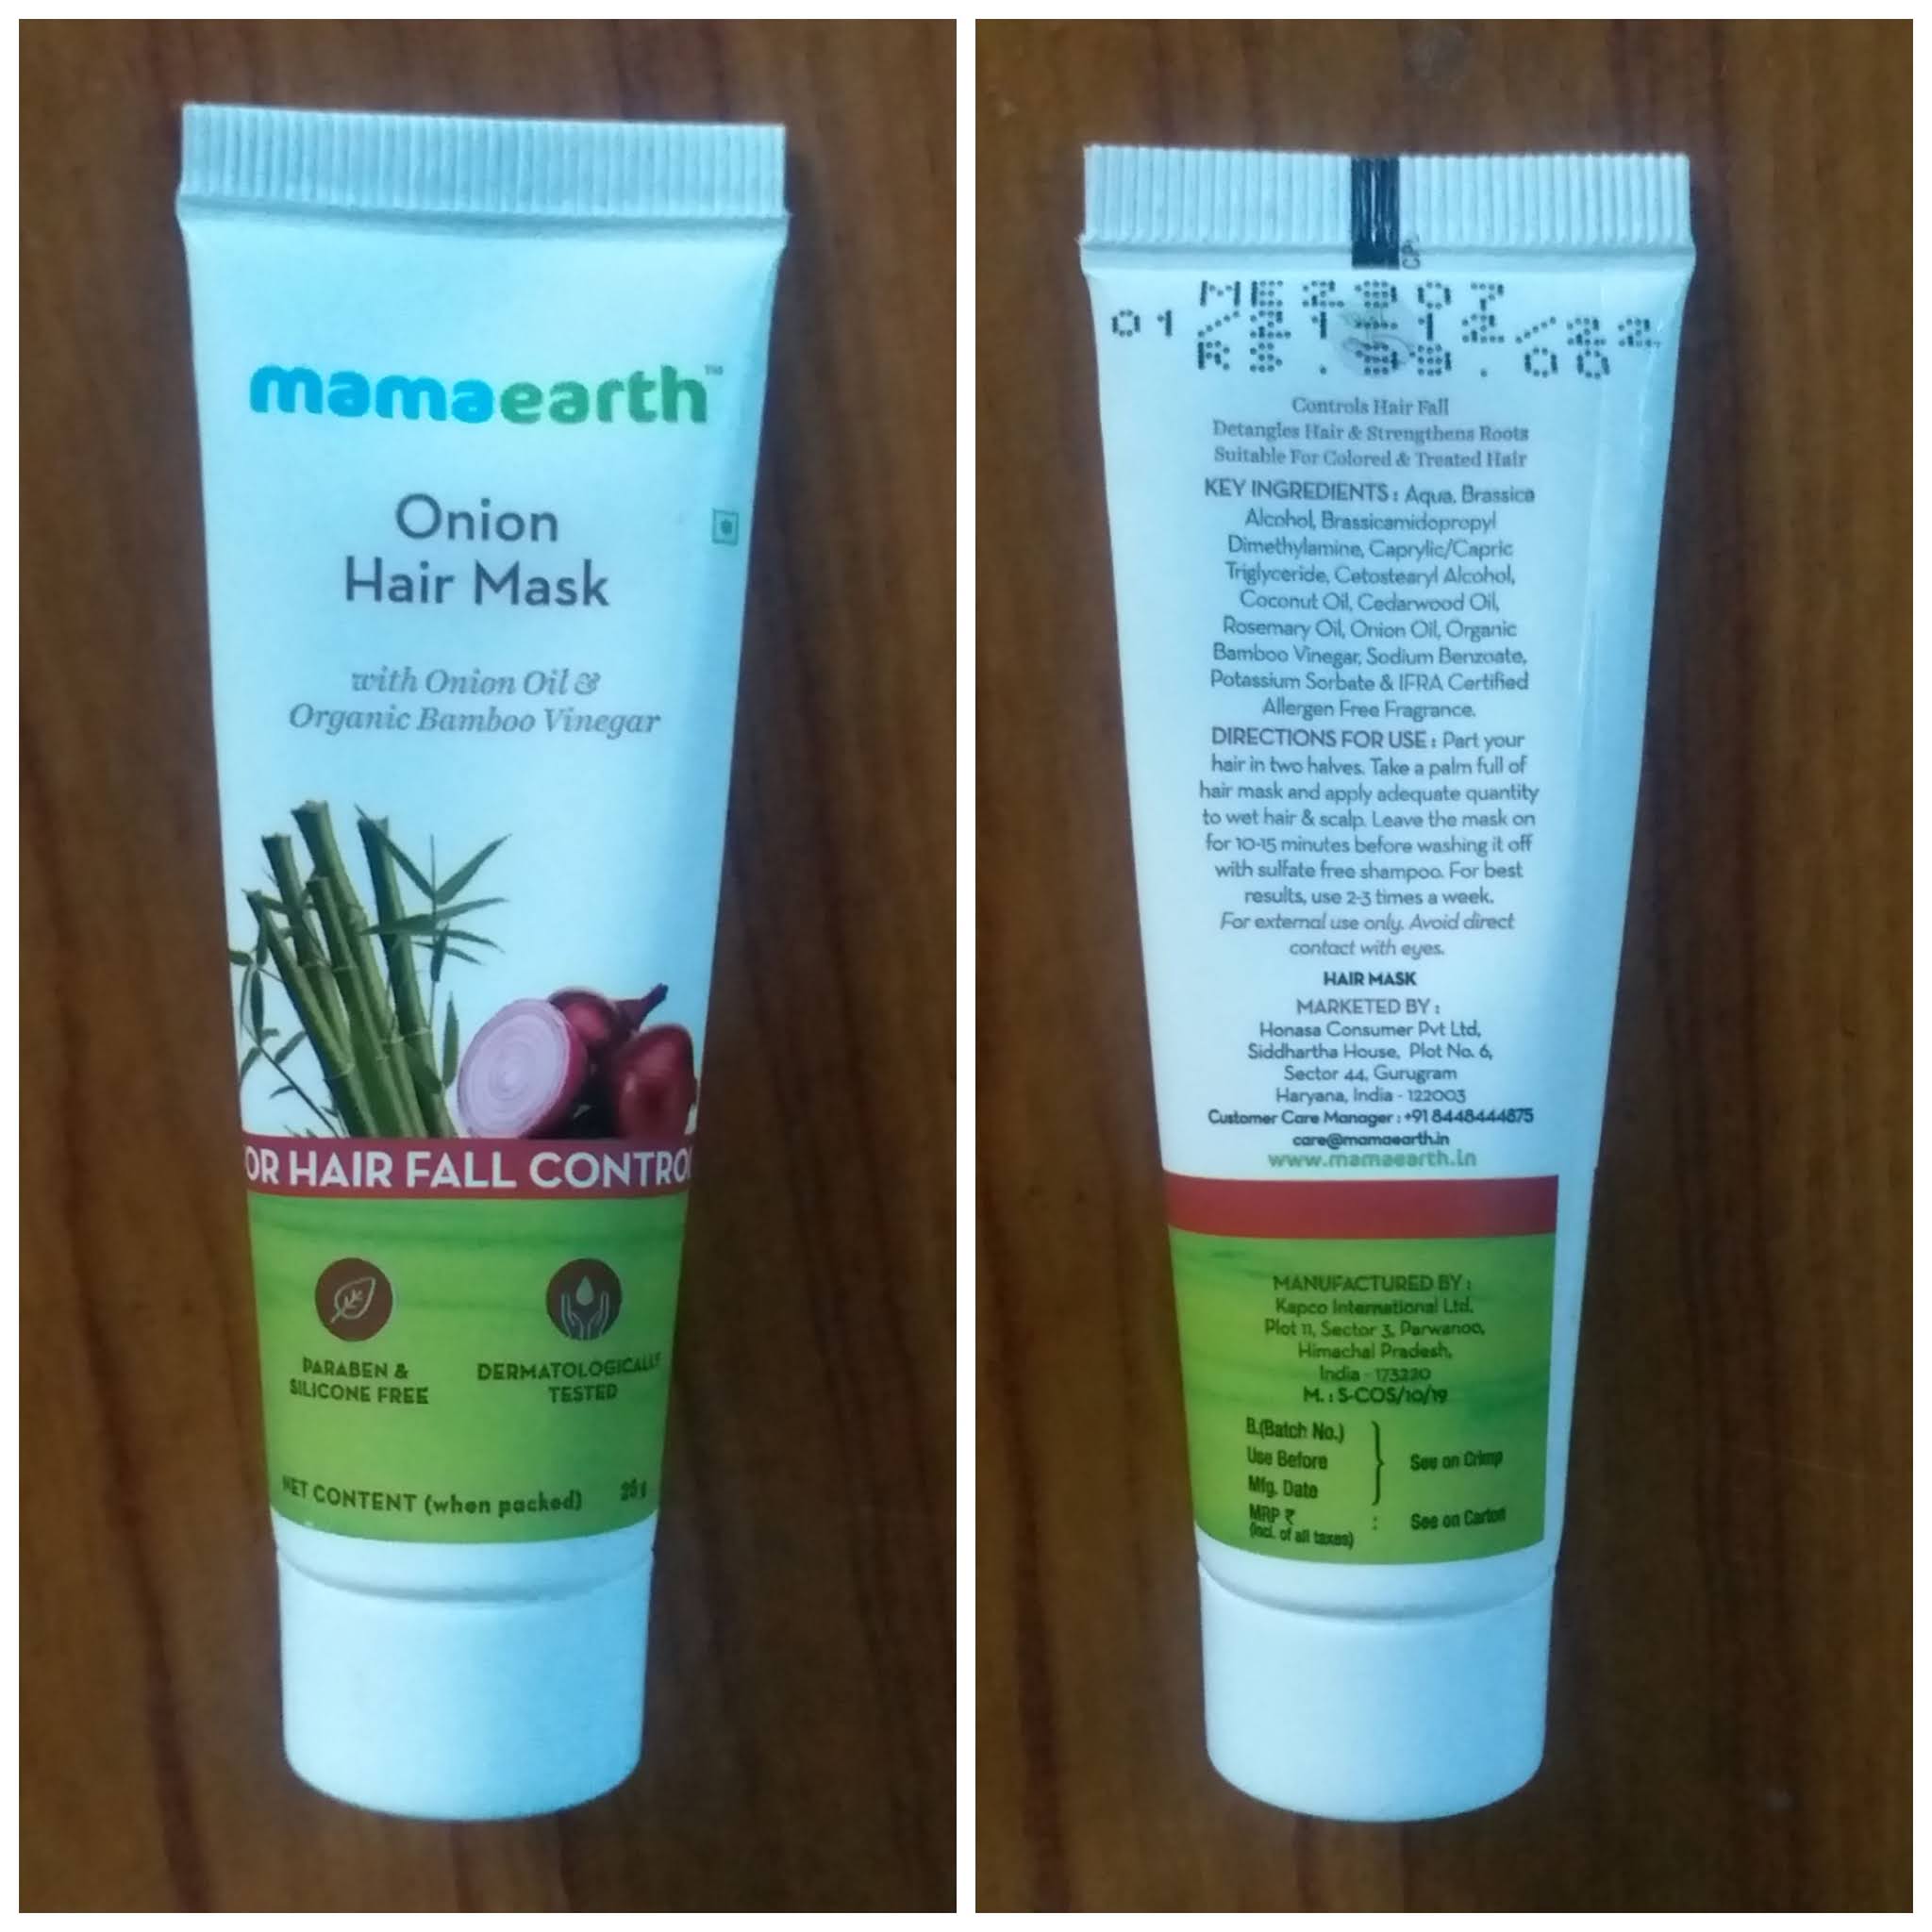 Mamaearth Onion Hair Mask Review - RJ PRO REVIEWS